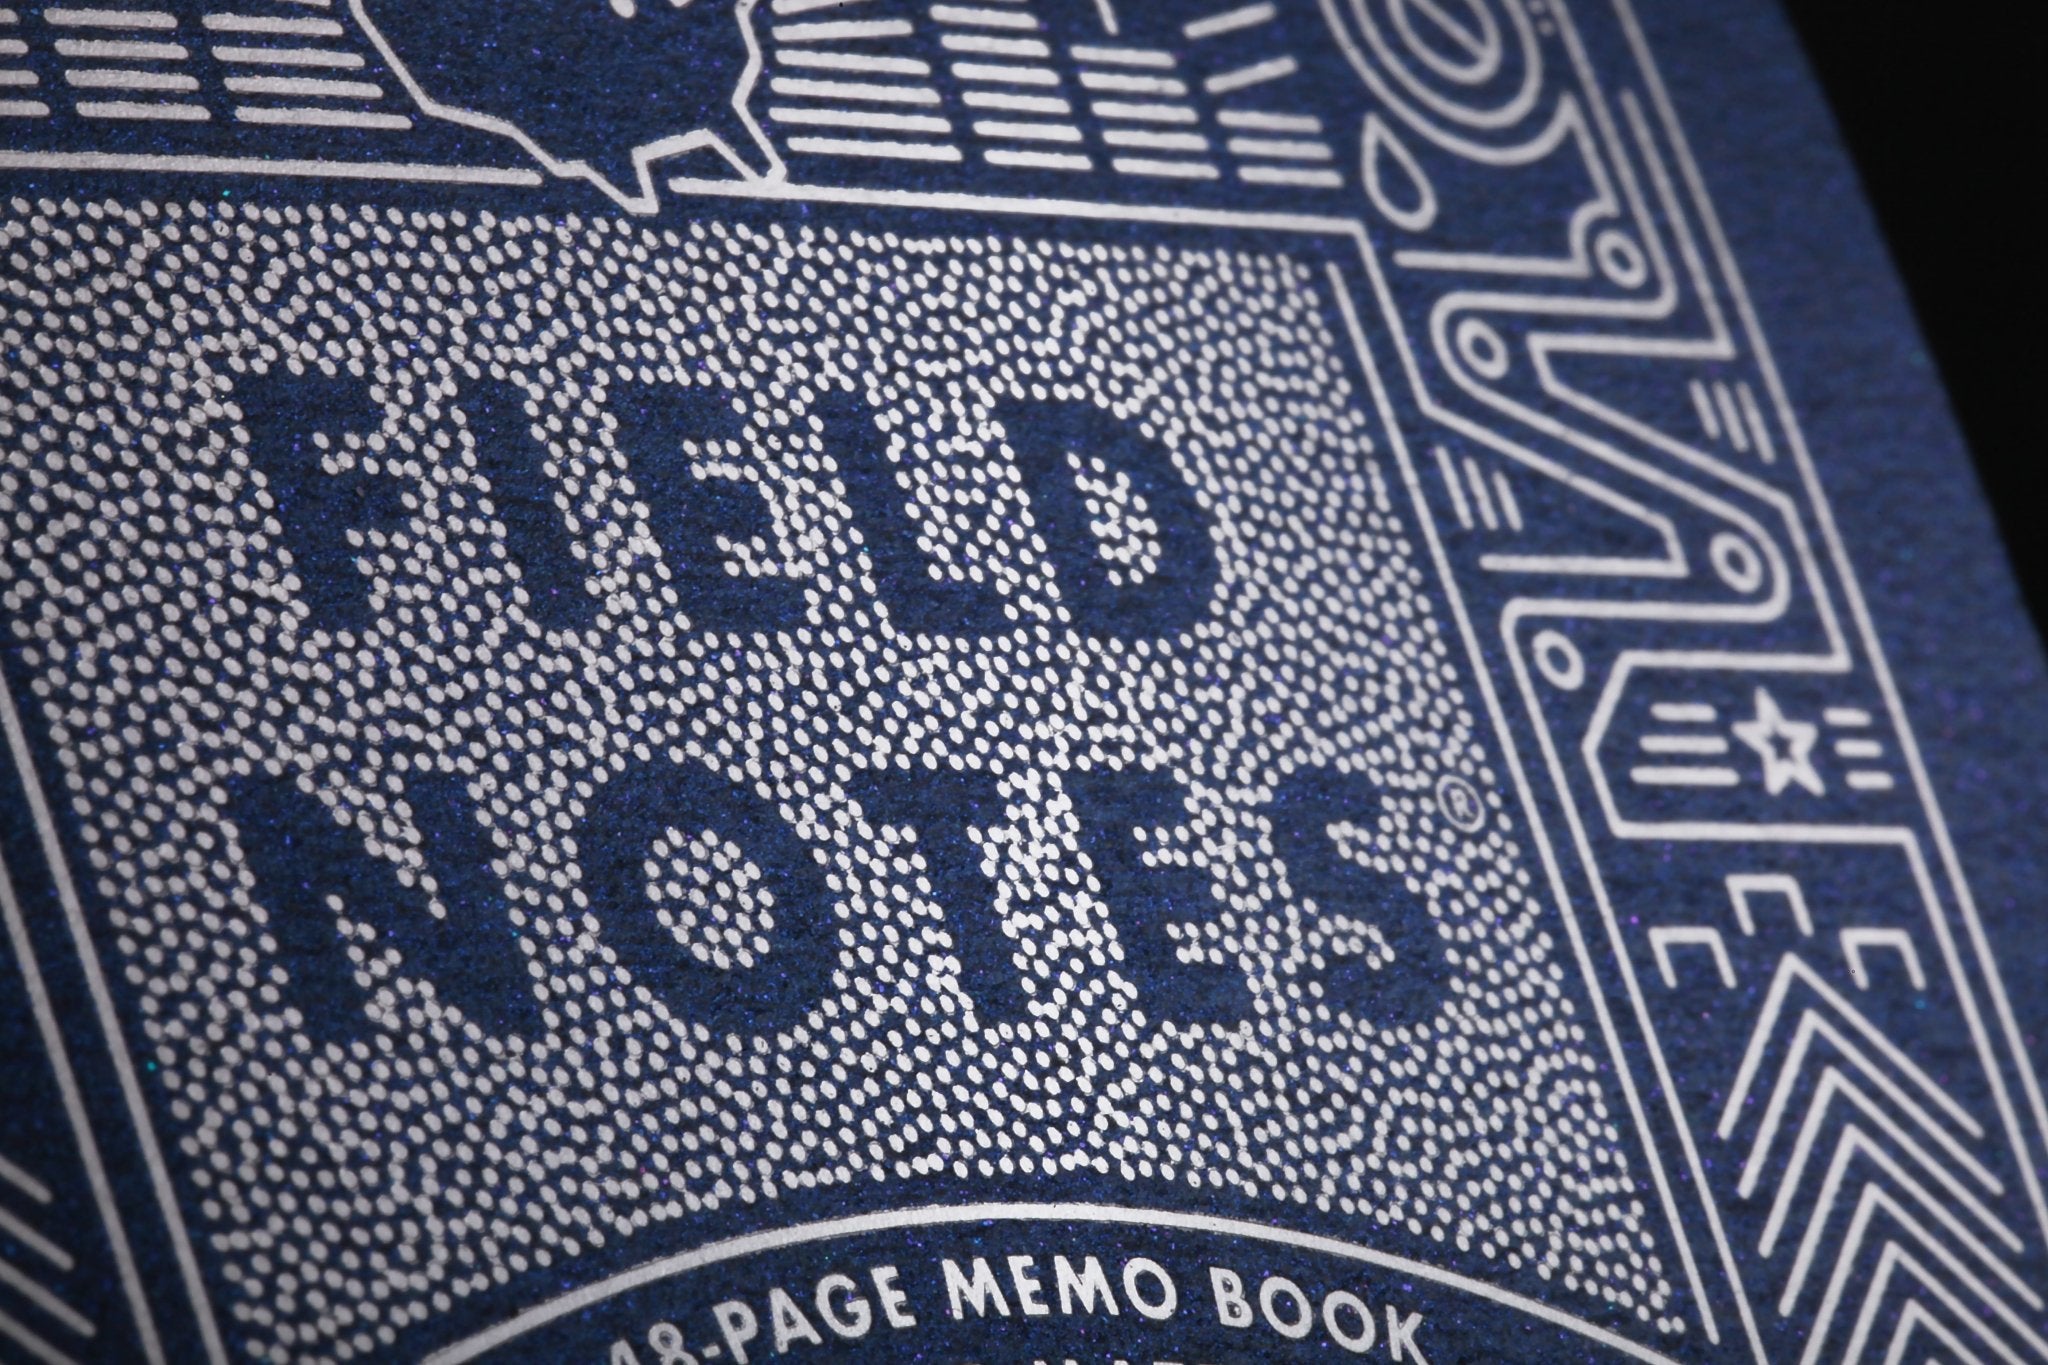 Field Notes: Foiled Again